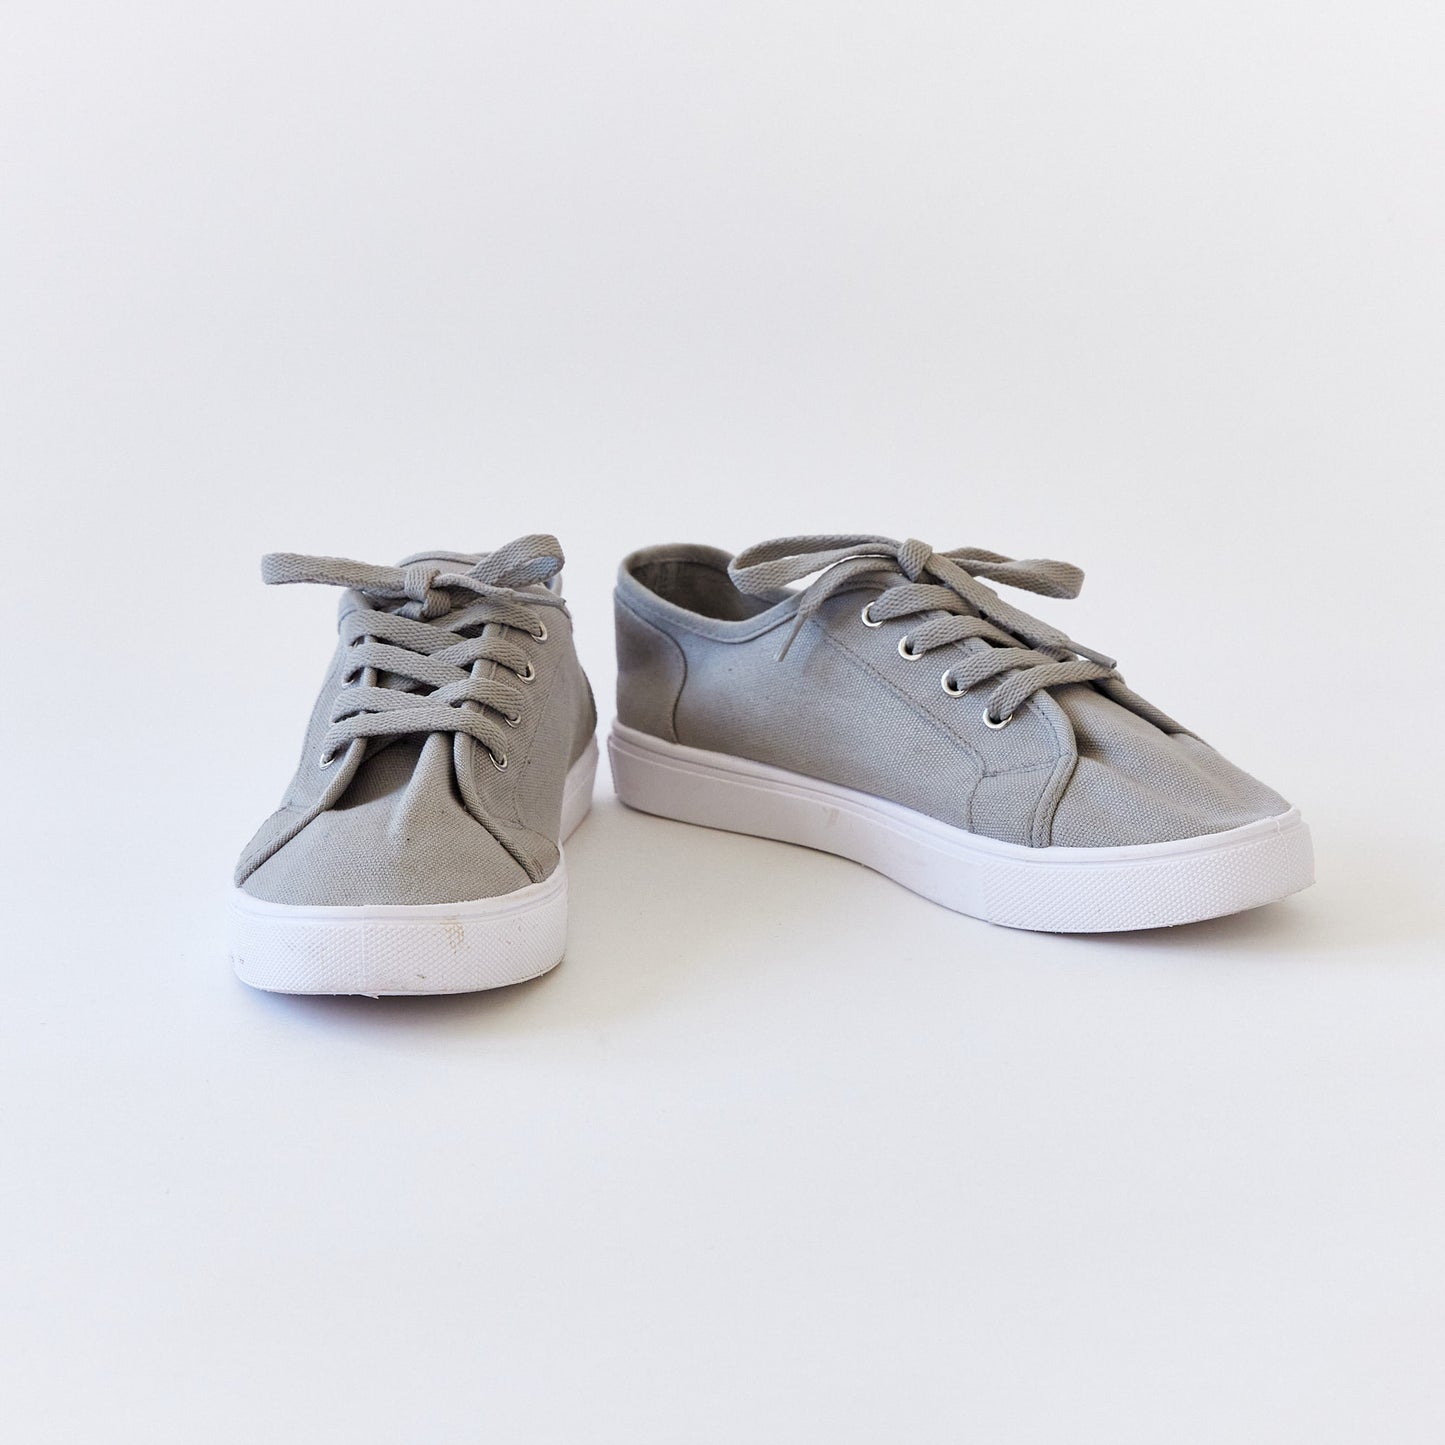 Grey Lace up Plimsoll size 6